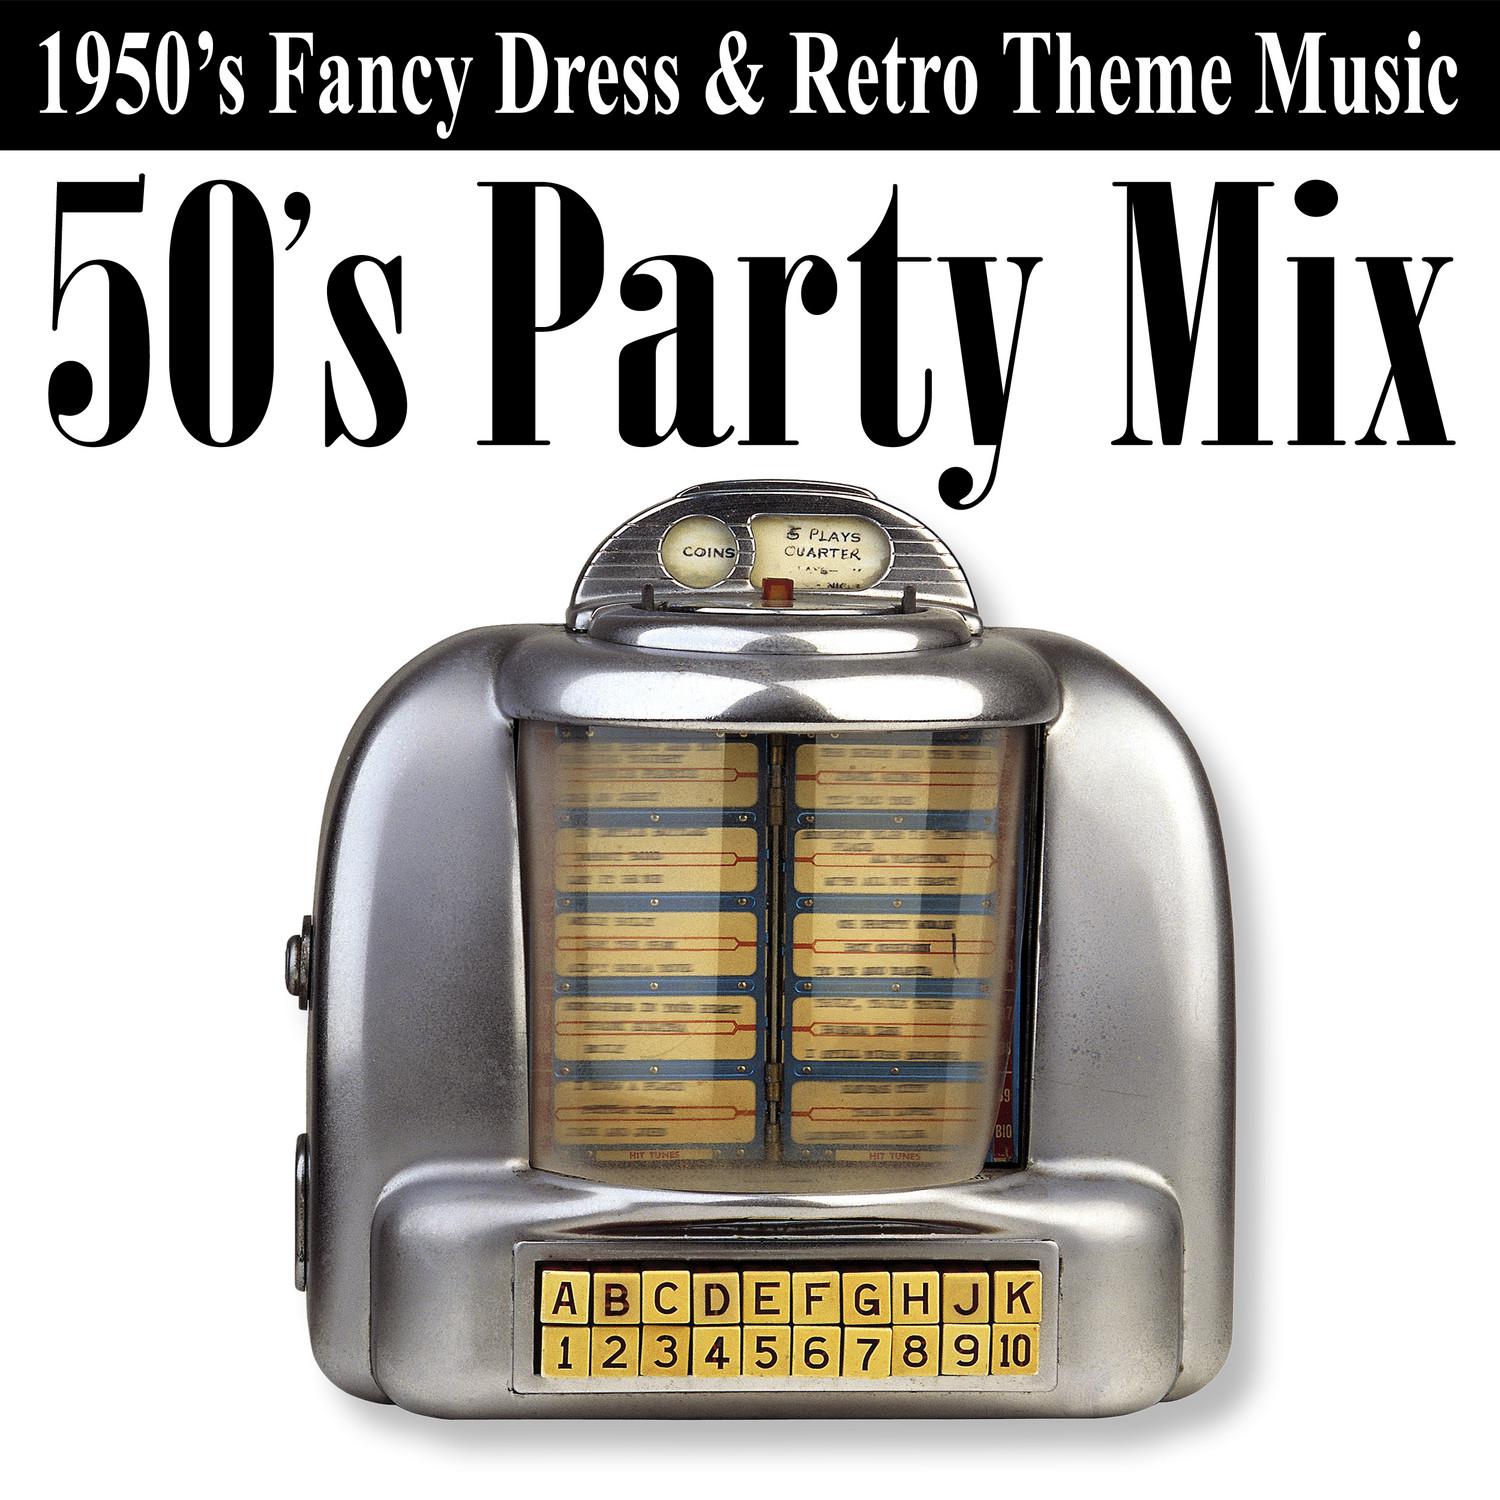 Jeepers Creepers (50's Party Mix)